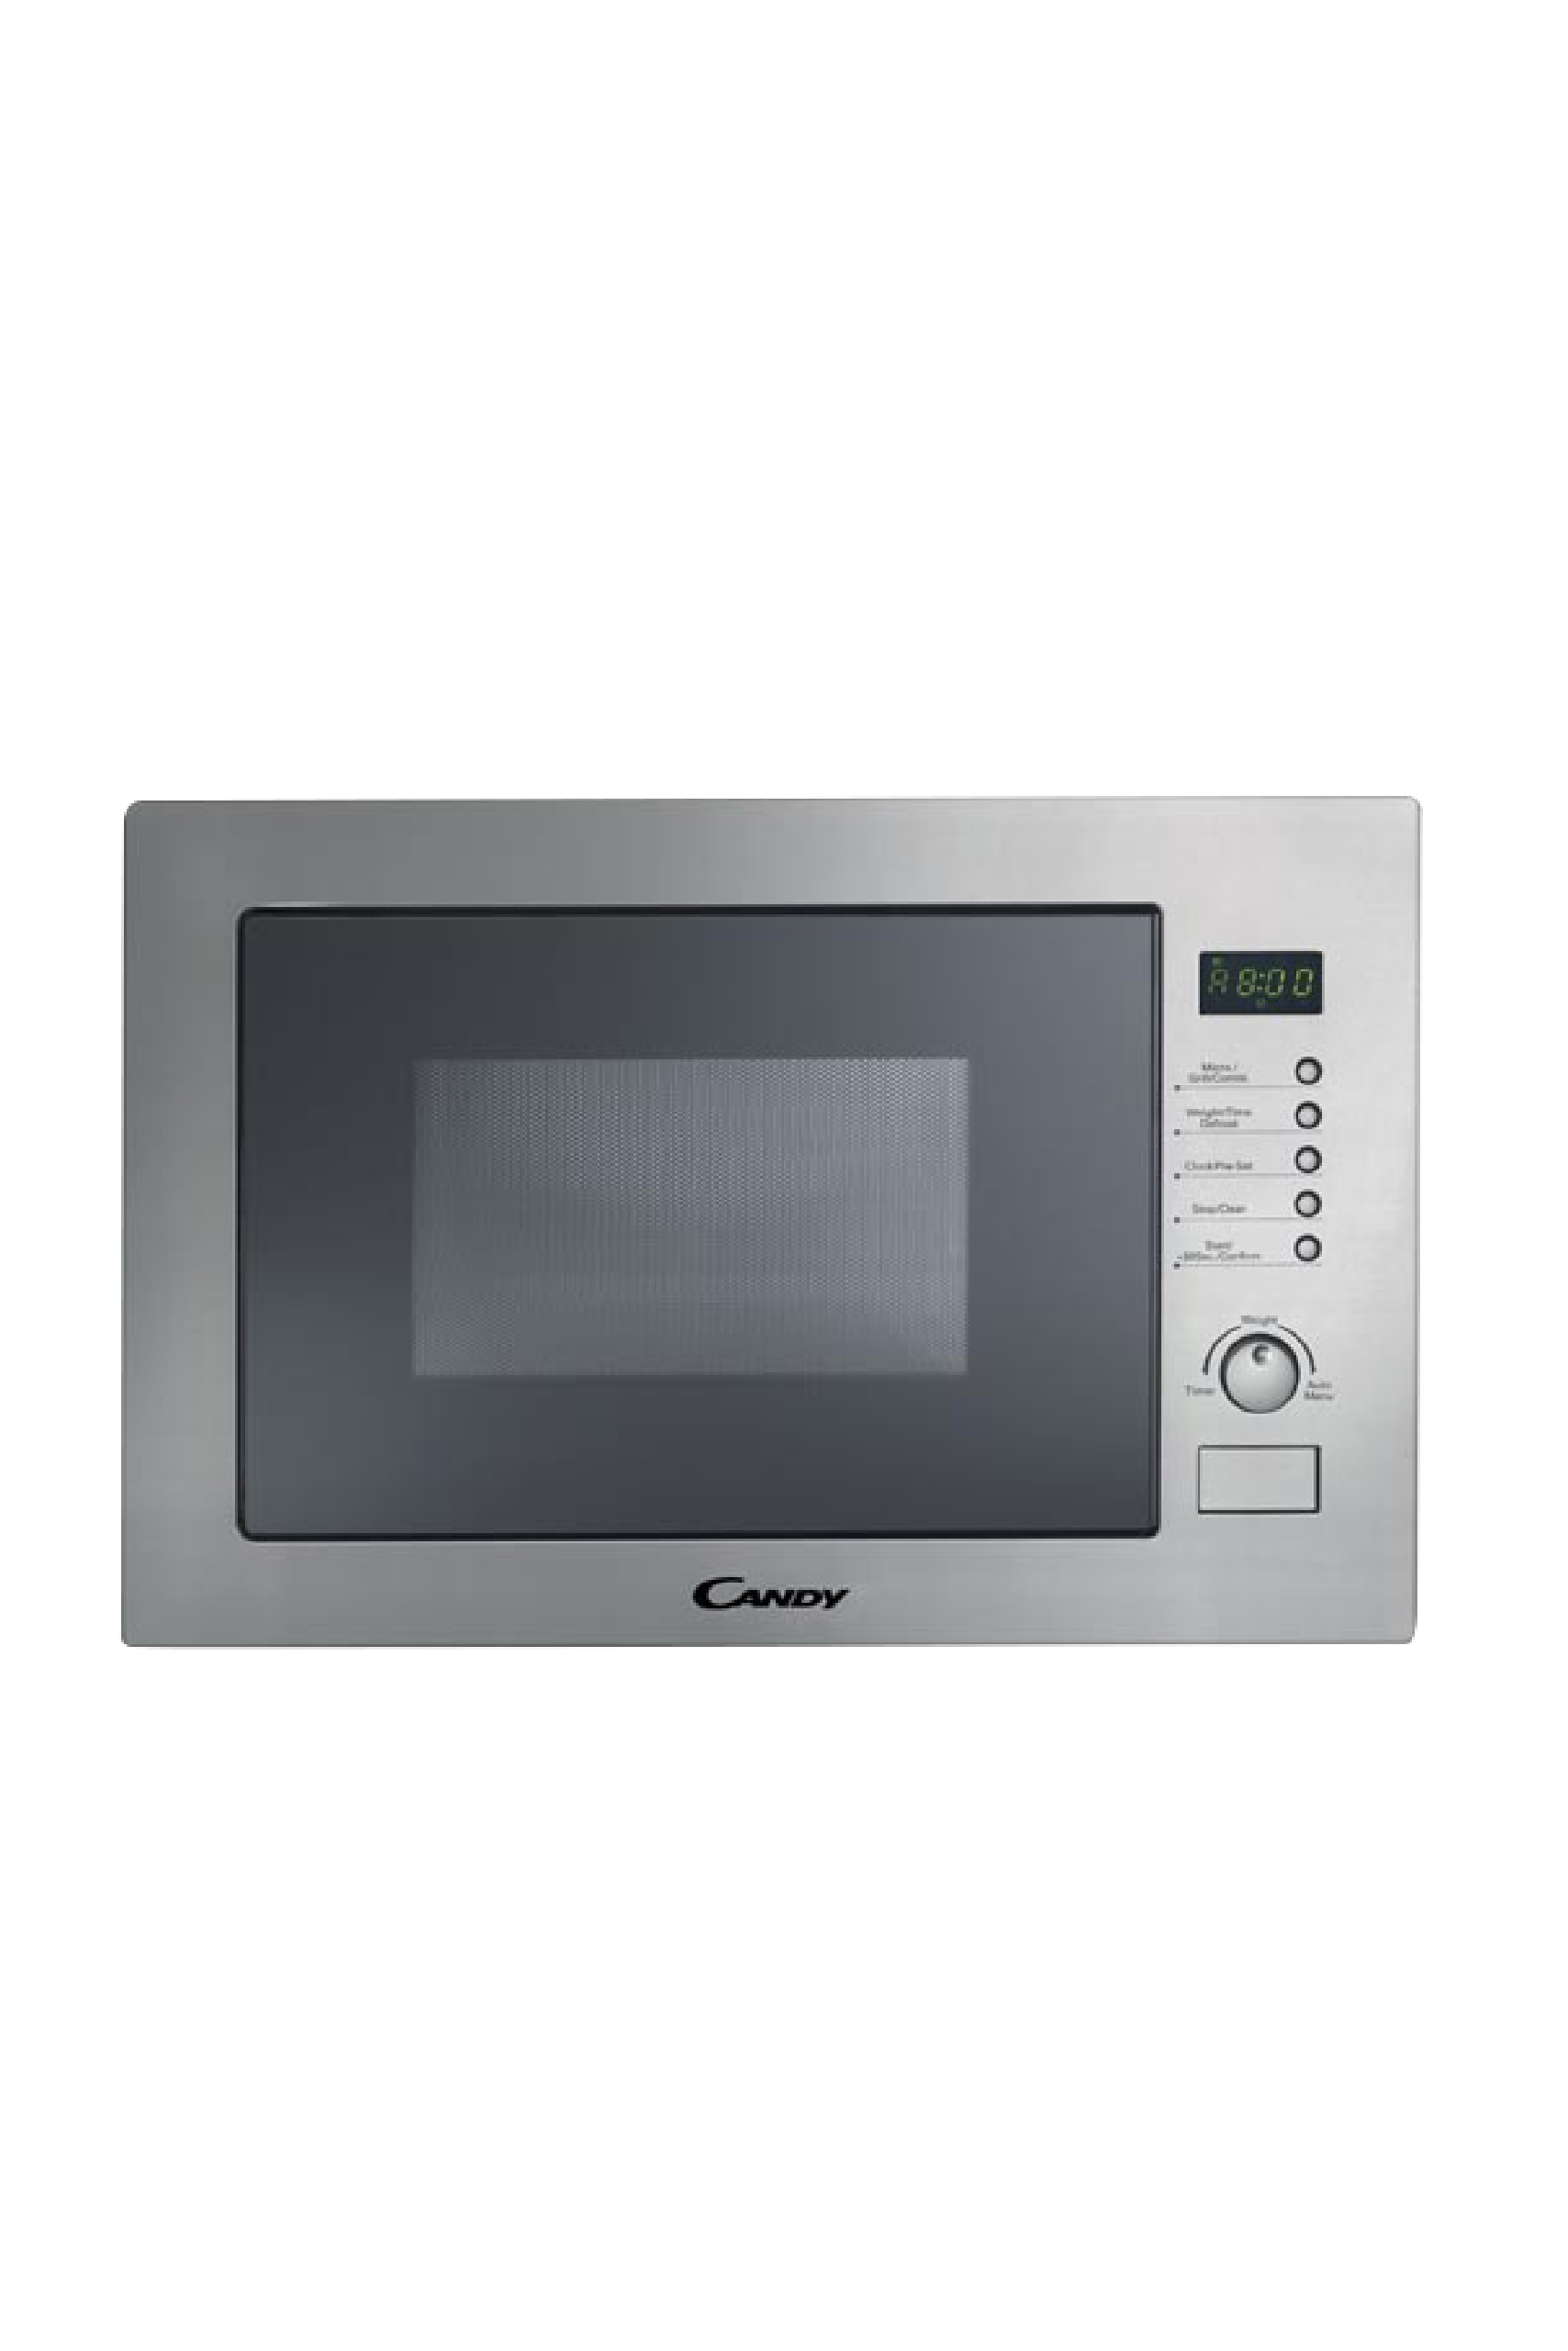 Candy Built-in Microwave 25 Liter